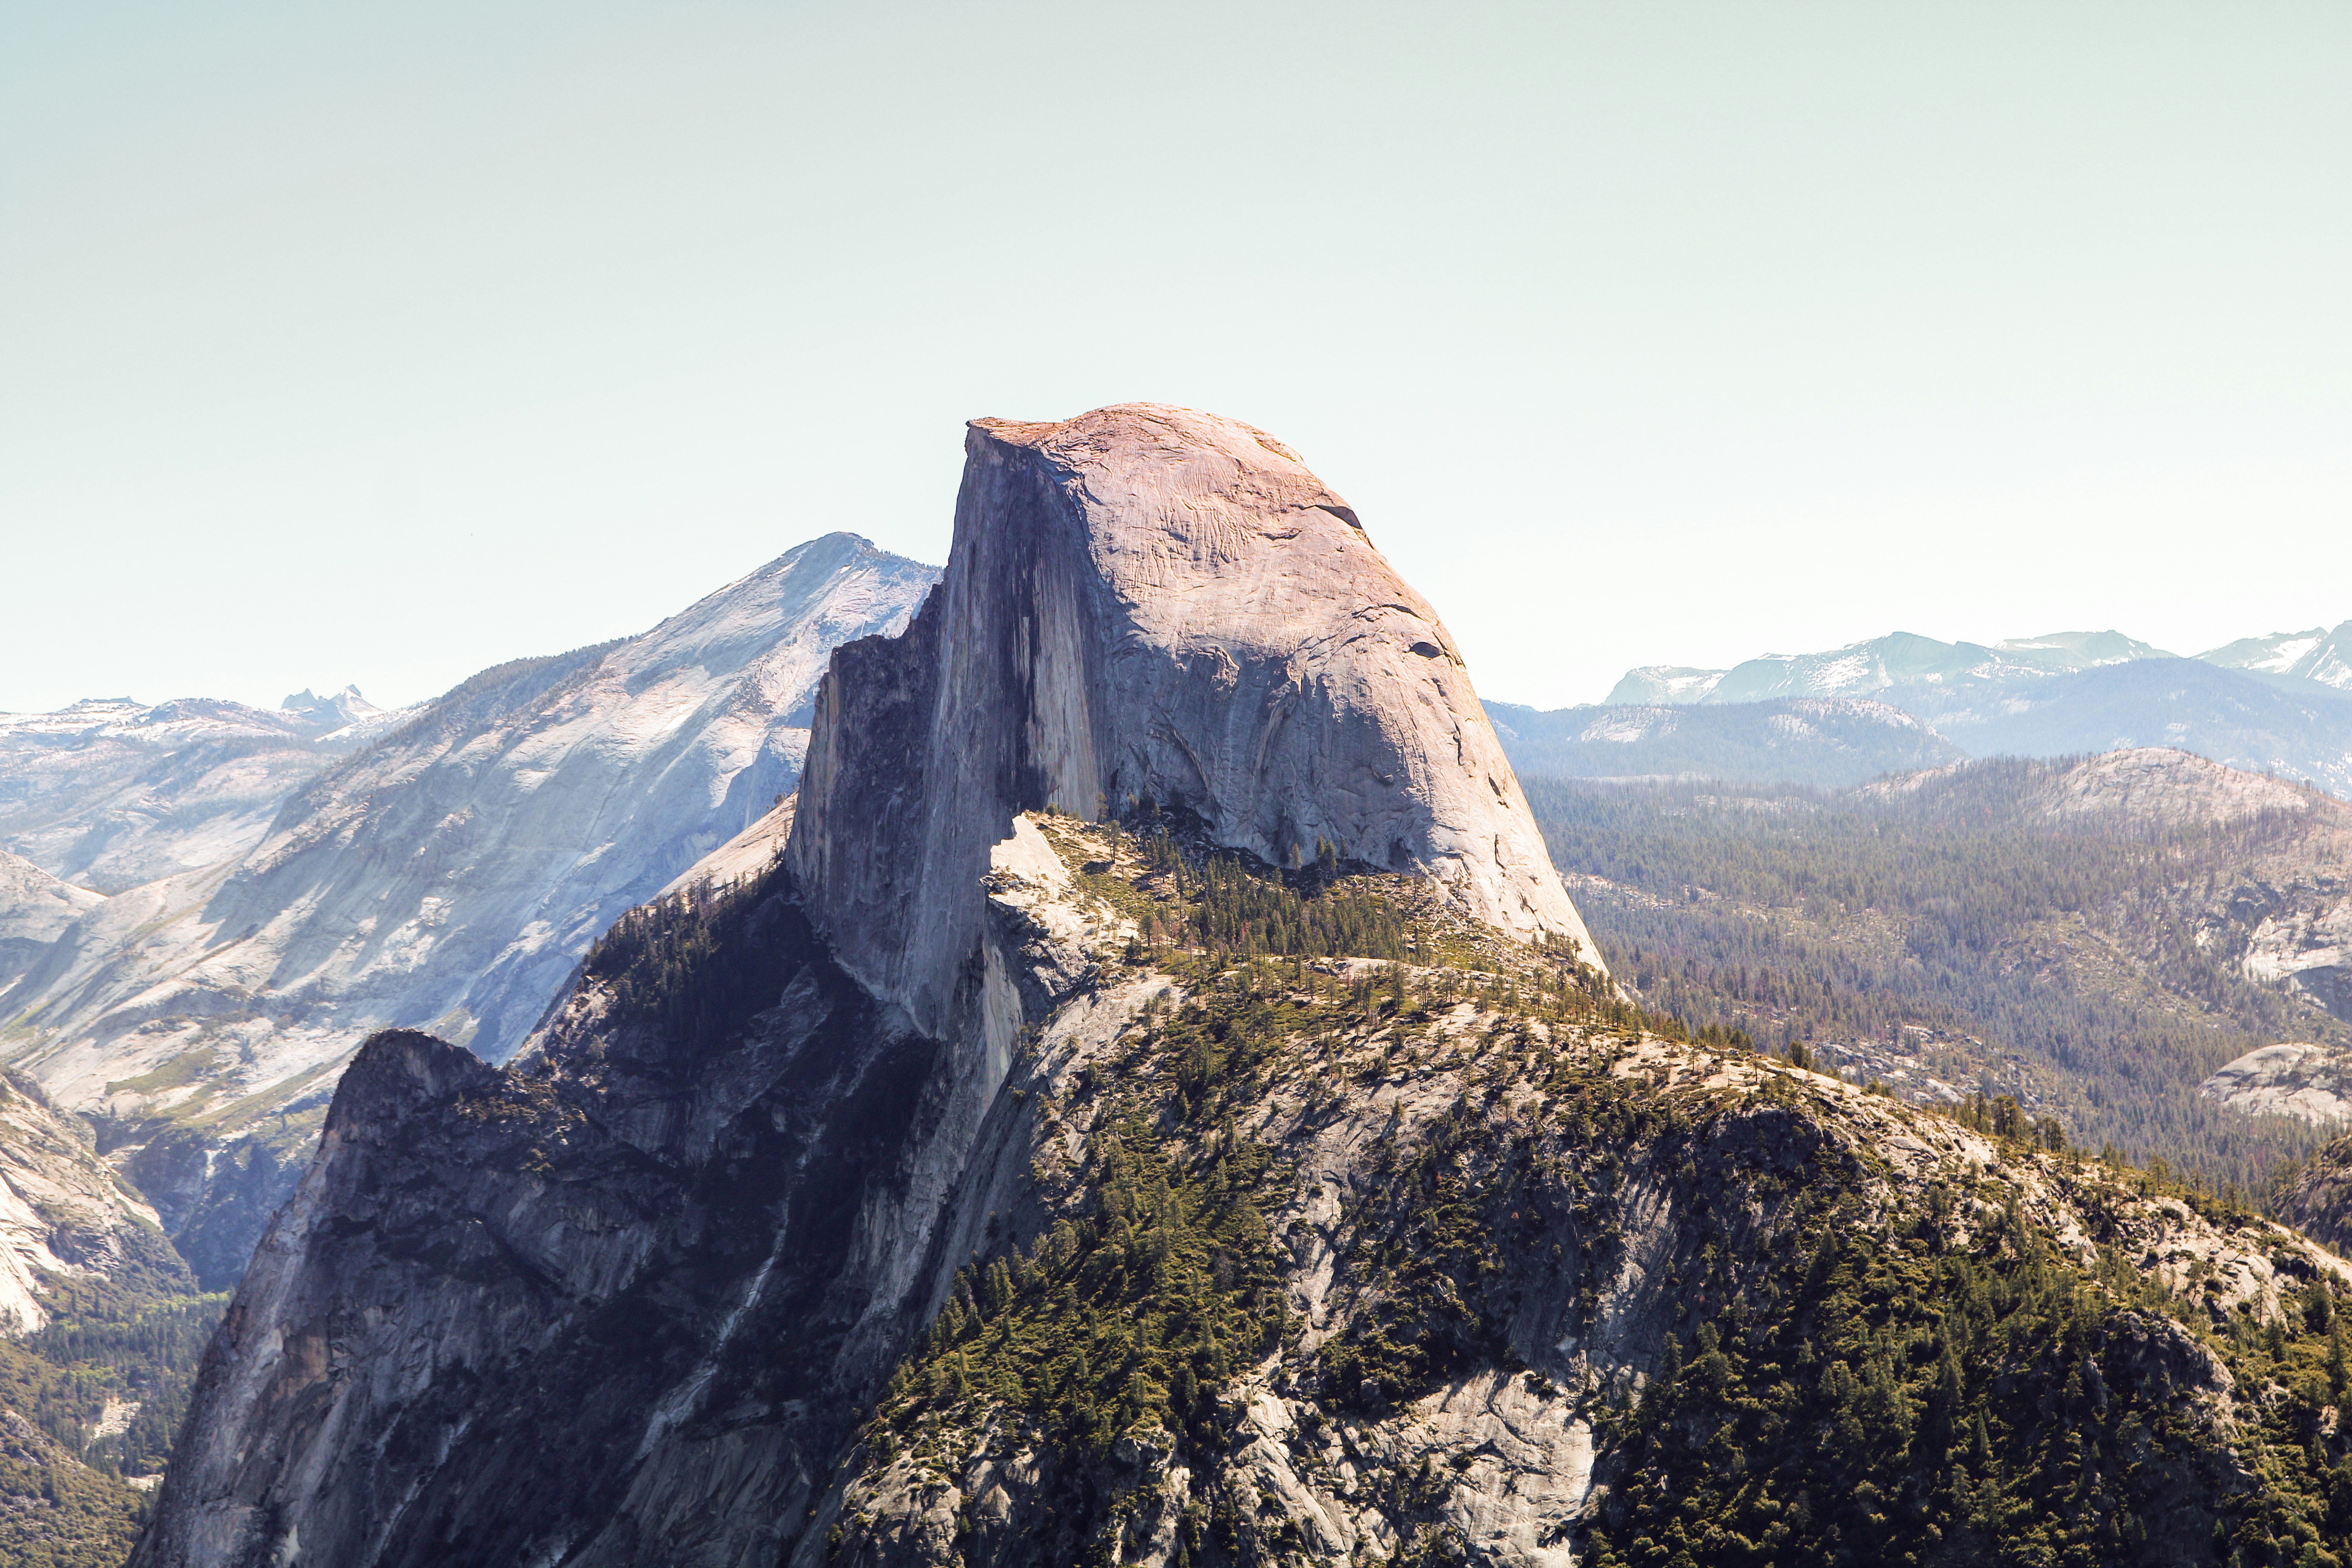 I took this shot from Glacier Point - a lookout spot above Yosemite Valley, and probably my favourite place on the planet. This majestic view of Half Dome never fails to astound me, and I end taking some variation of this same photo every time I go because I just can’t help it.